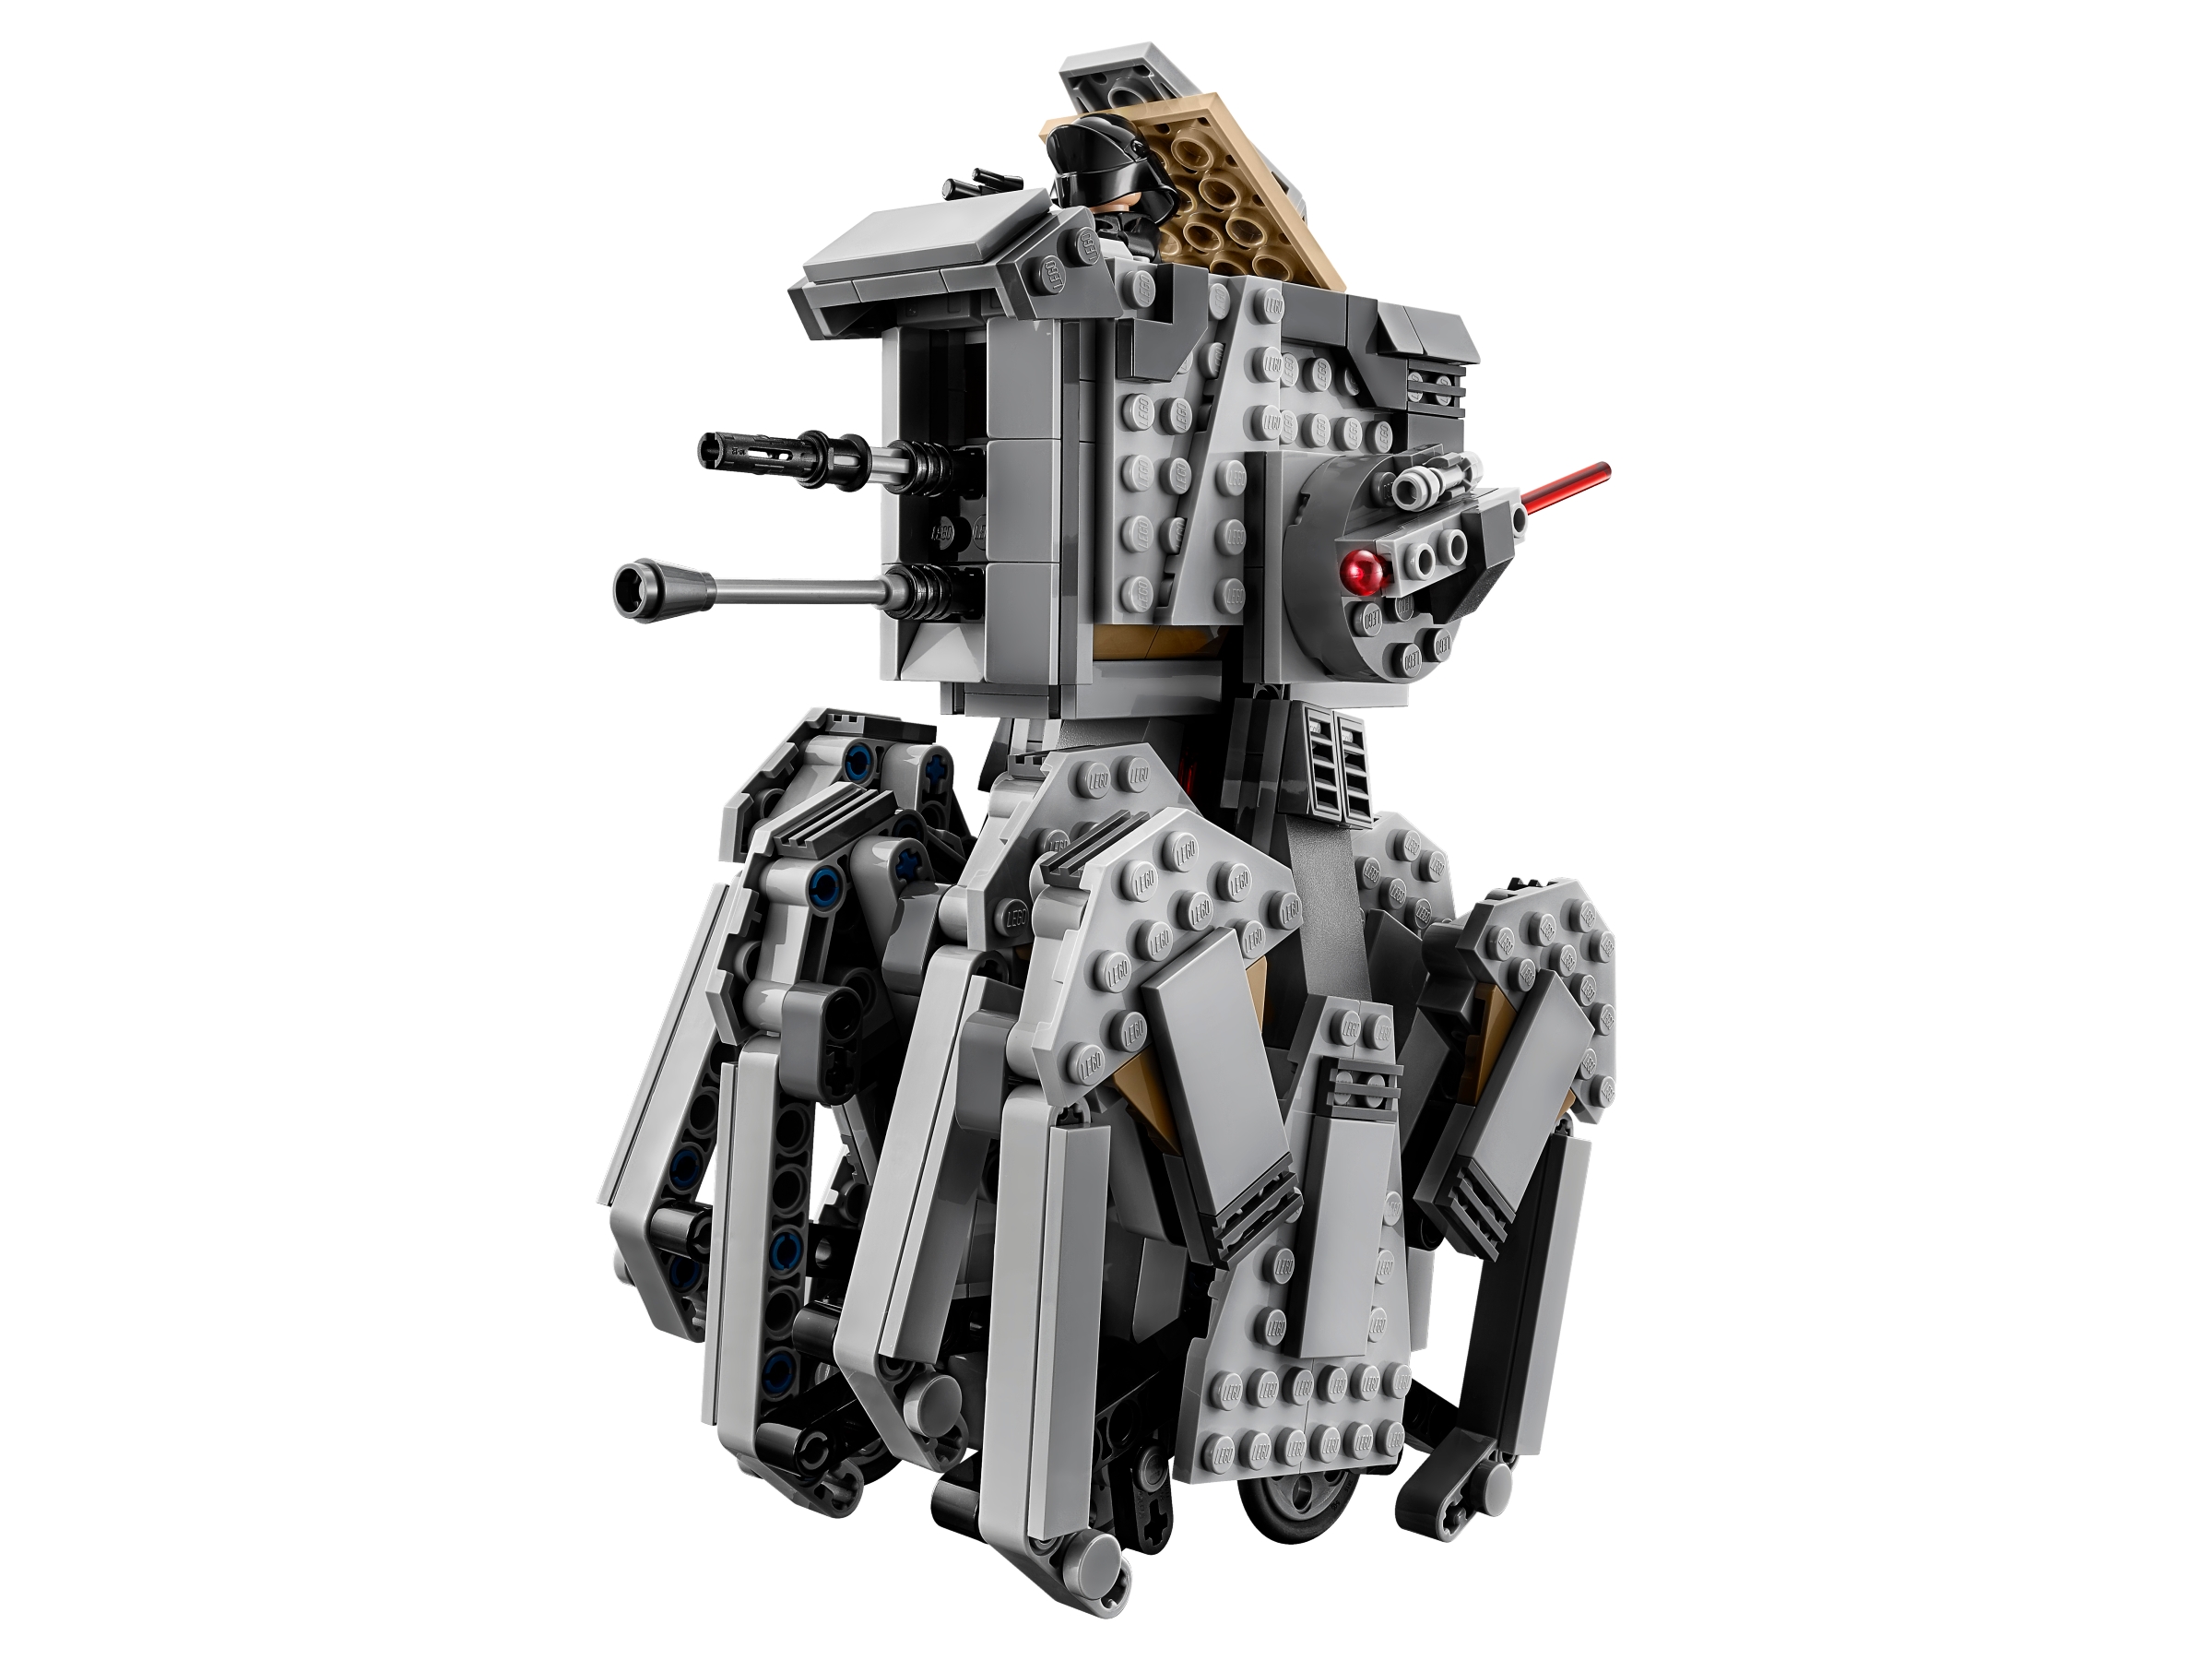 75177 first order Heavy Scout Walker ™ & 0 LEGO ® Star Wars ™ € Spedizione & NUOVO OVP 